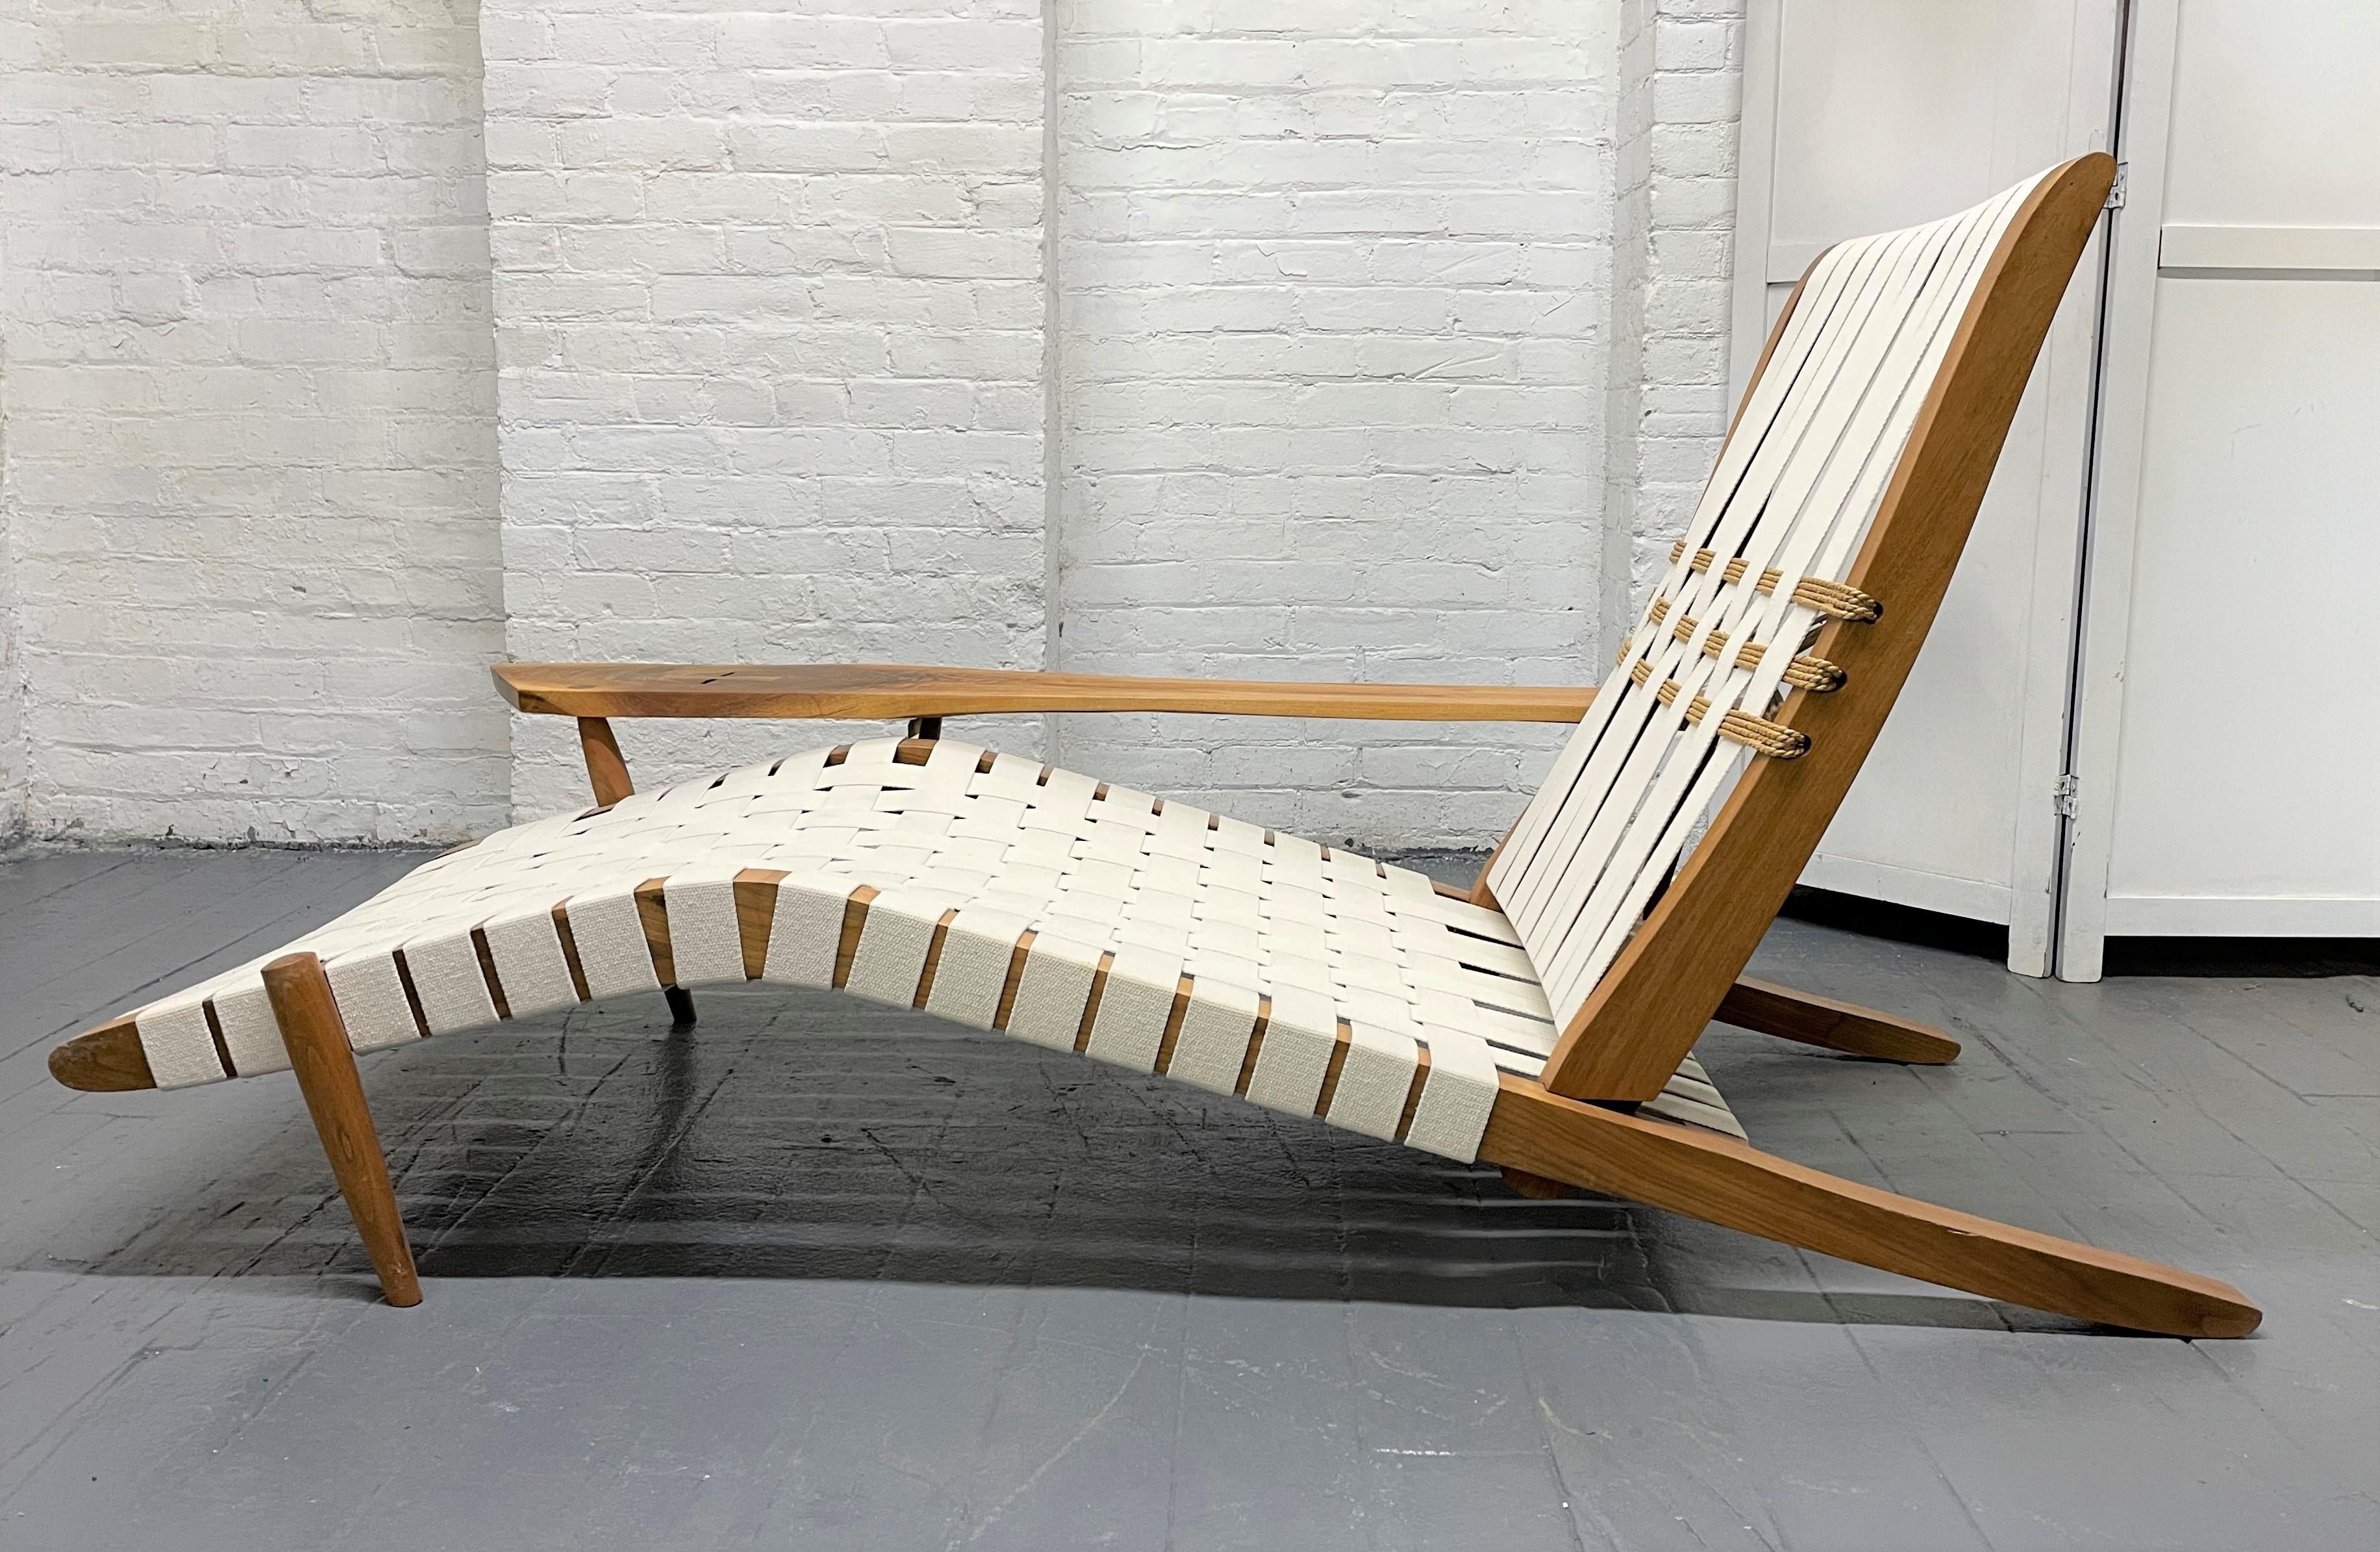 George Nakashima Studio chaise lounge long chair with free-form arm. The chair is walnut with sea grass details and woven webbing. Sold with a certificate of authenticity.